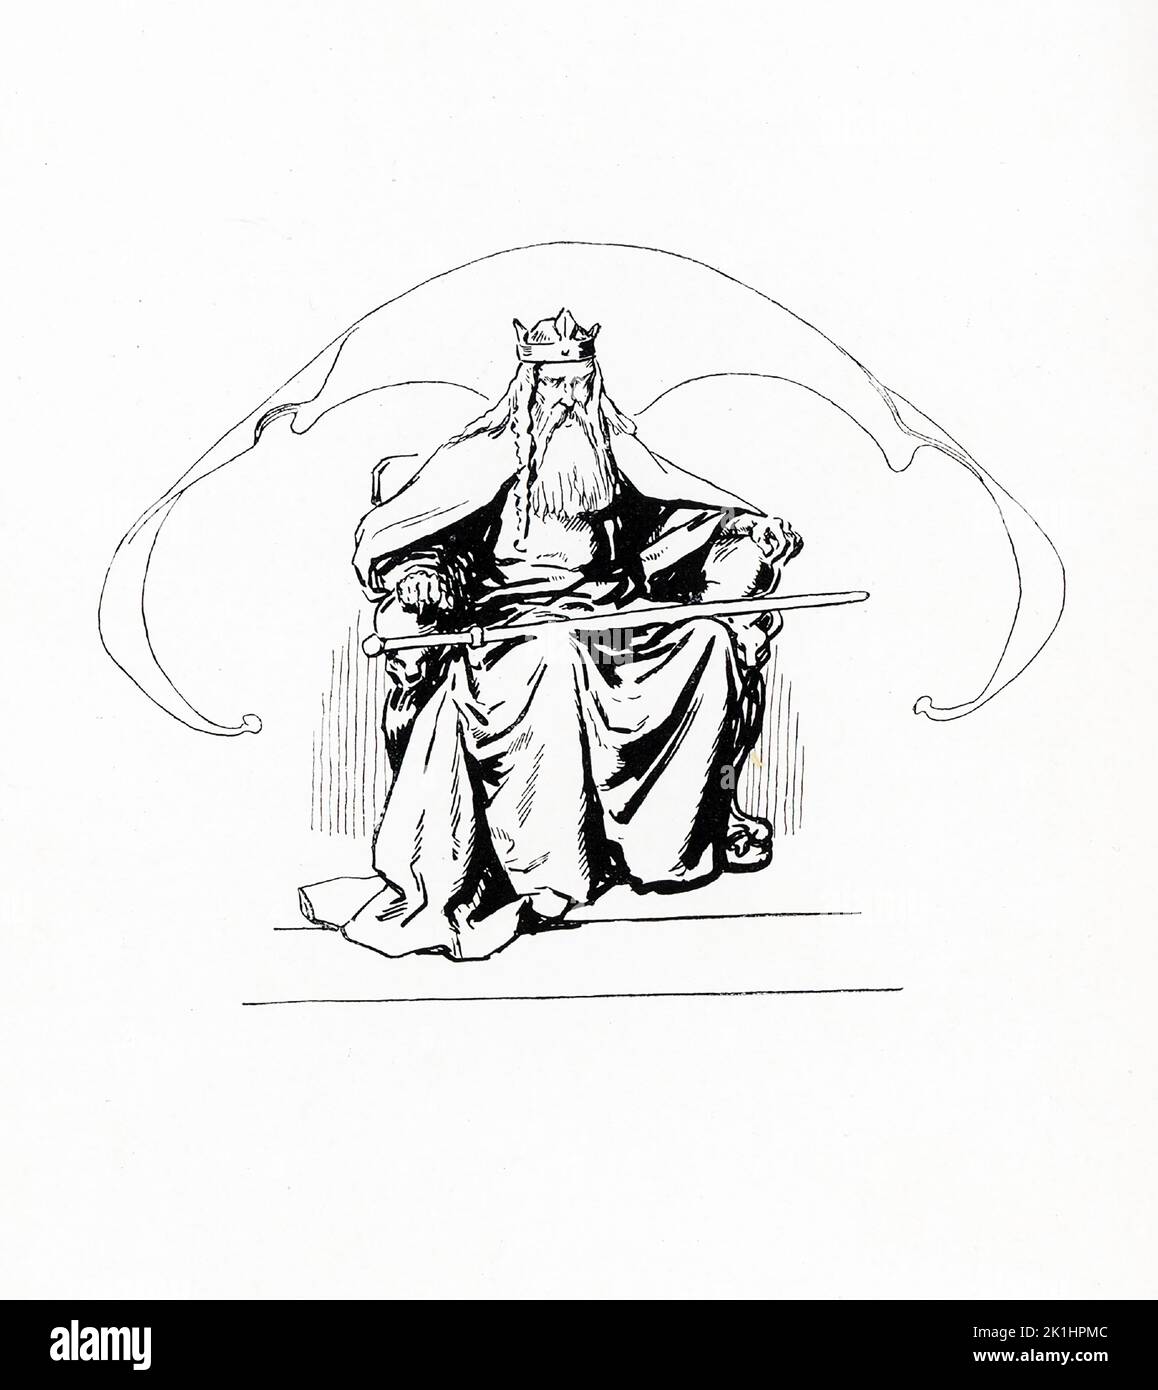 According to Norse mythology, Odin was one of the chief gods and the ruler of Asgard (the country or capital of the Norse gods). This illustration by Gordon Browne dates to 1913. Stock Photo